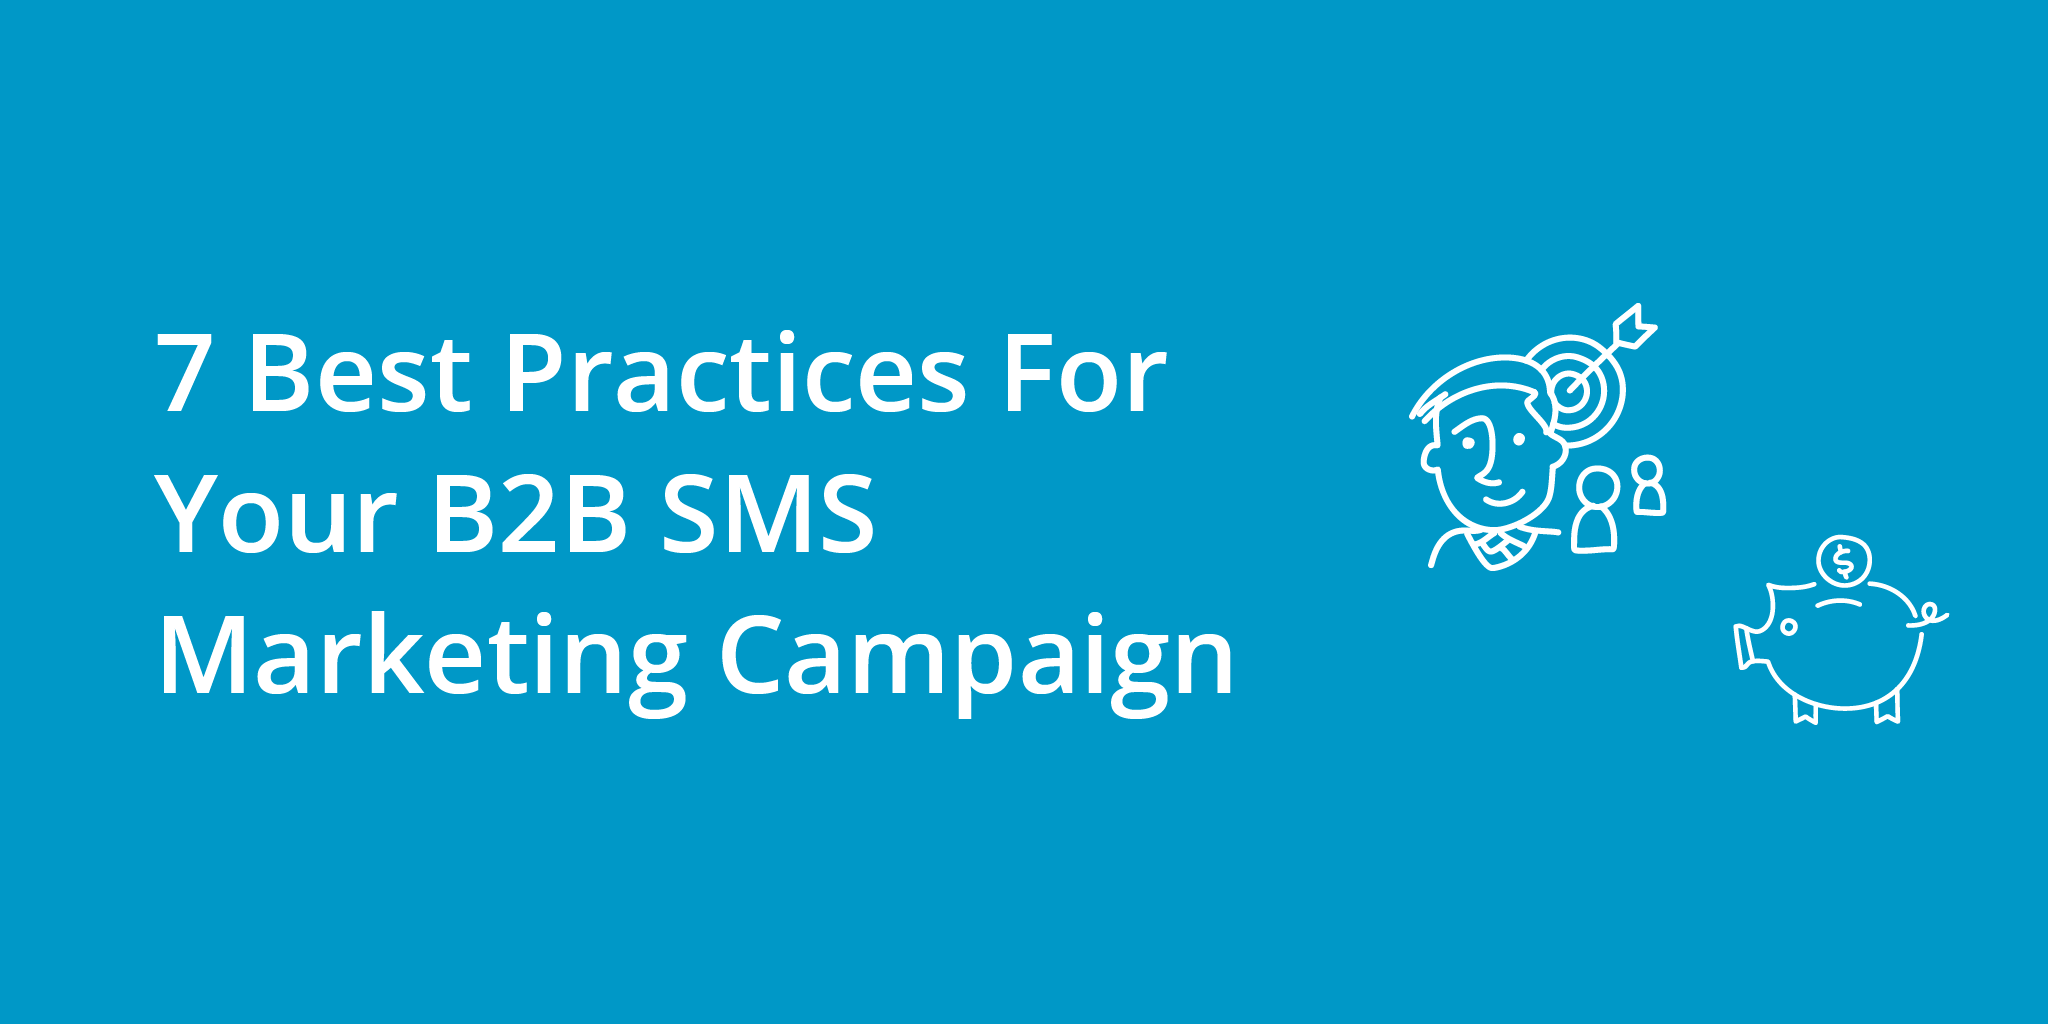 7 Best Practices For Your B2B SMS Marketing Campaign